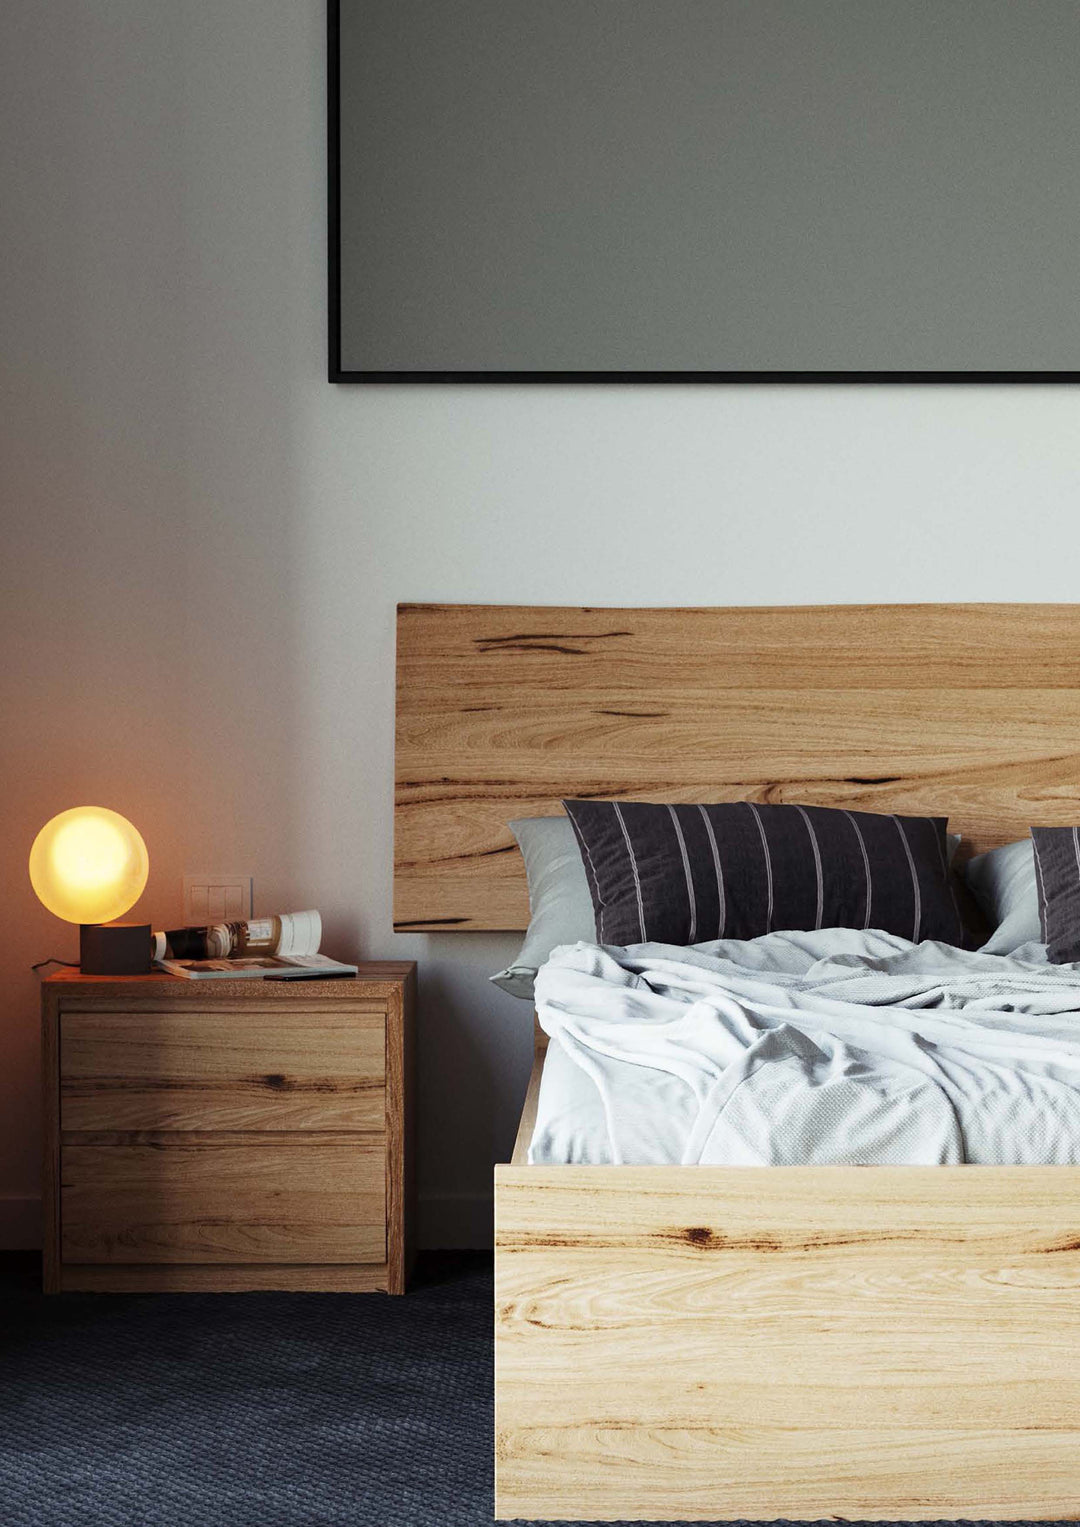 Connor Messmate solid Timber bed